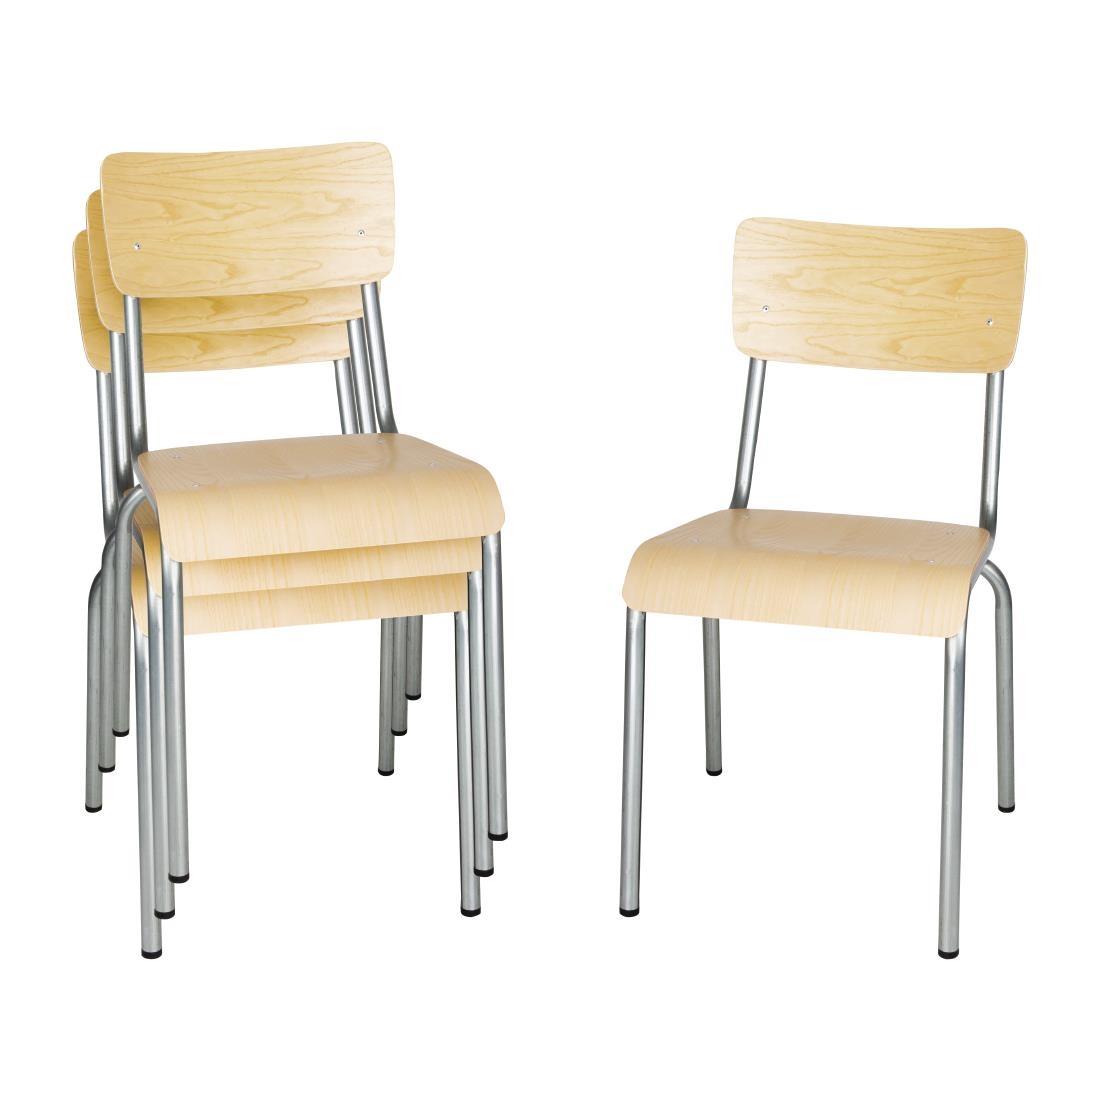 Bolero Cantina Side Chairs with Wooden Seat Pad and Backrest Galvanised (Pack of 4) - FB946  - 6